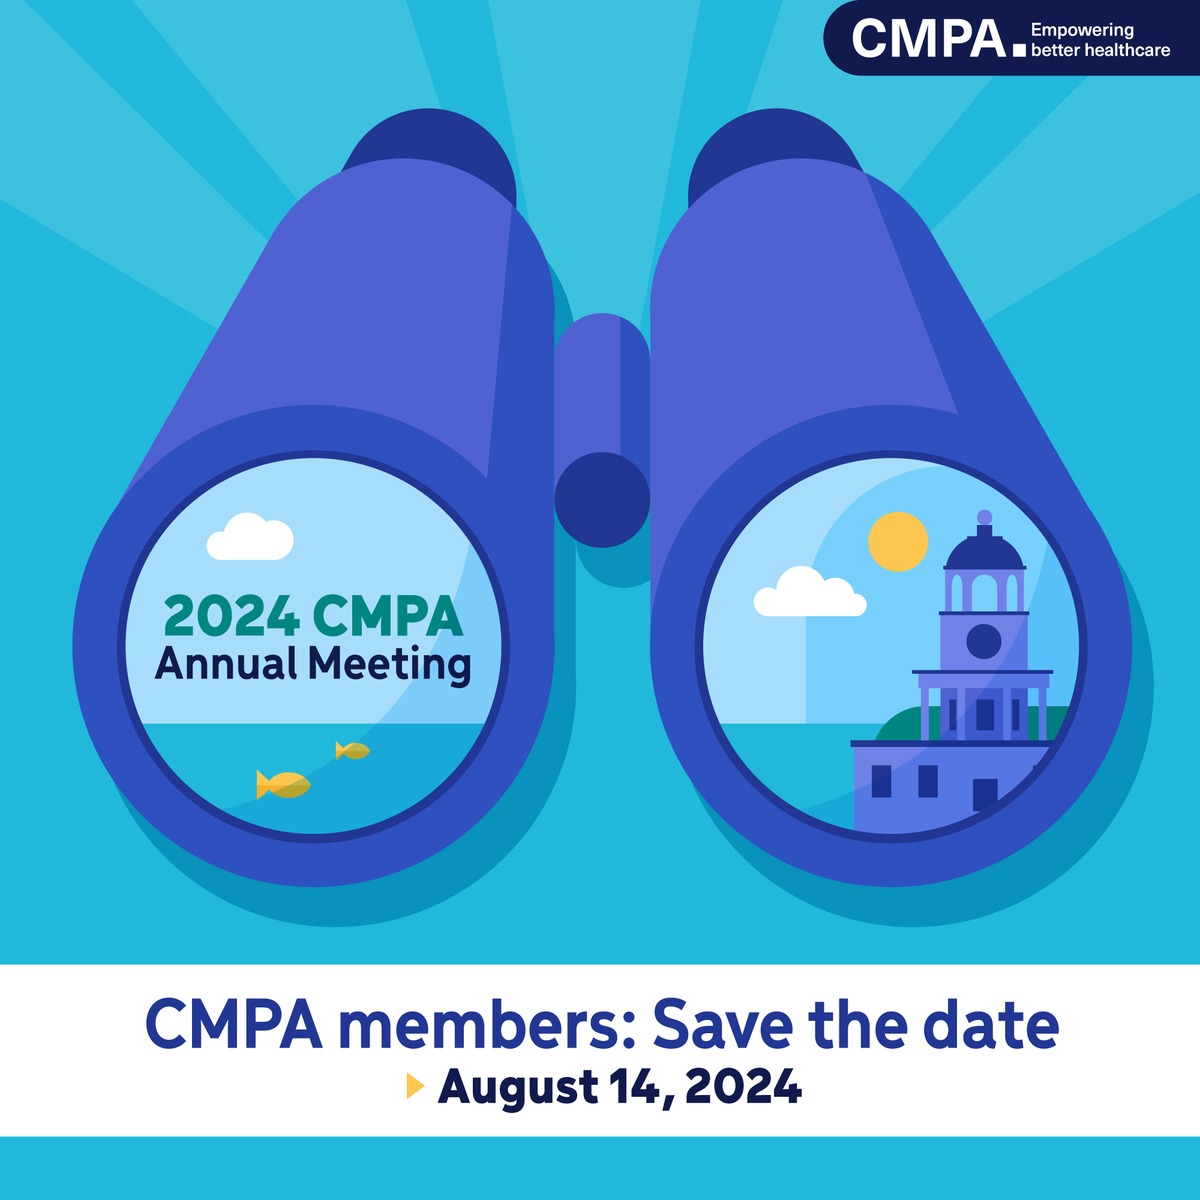 CMPA members: Set your sights 👓 on Halifax this summer! Join us in-person or virtually for our 2024 CMPA Annual Meeting. Watch for your invitation THIS WEEK. Agenda: ow.ly/fe4J50Rl5Ev #MedTwitter